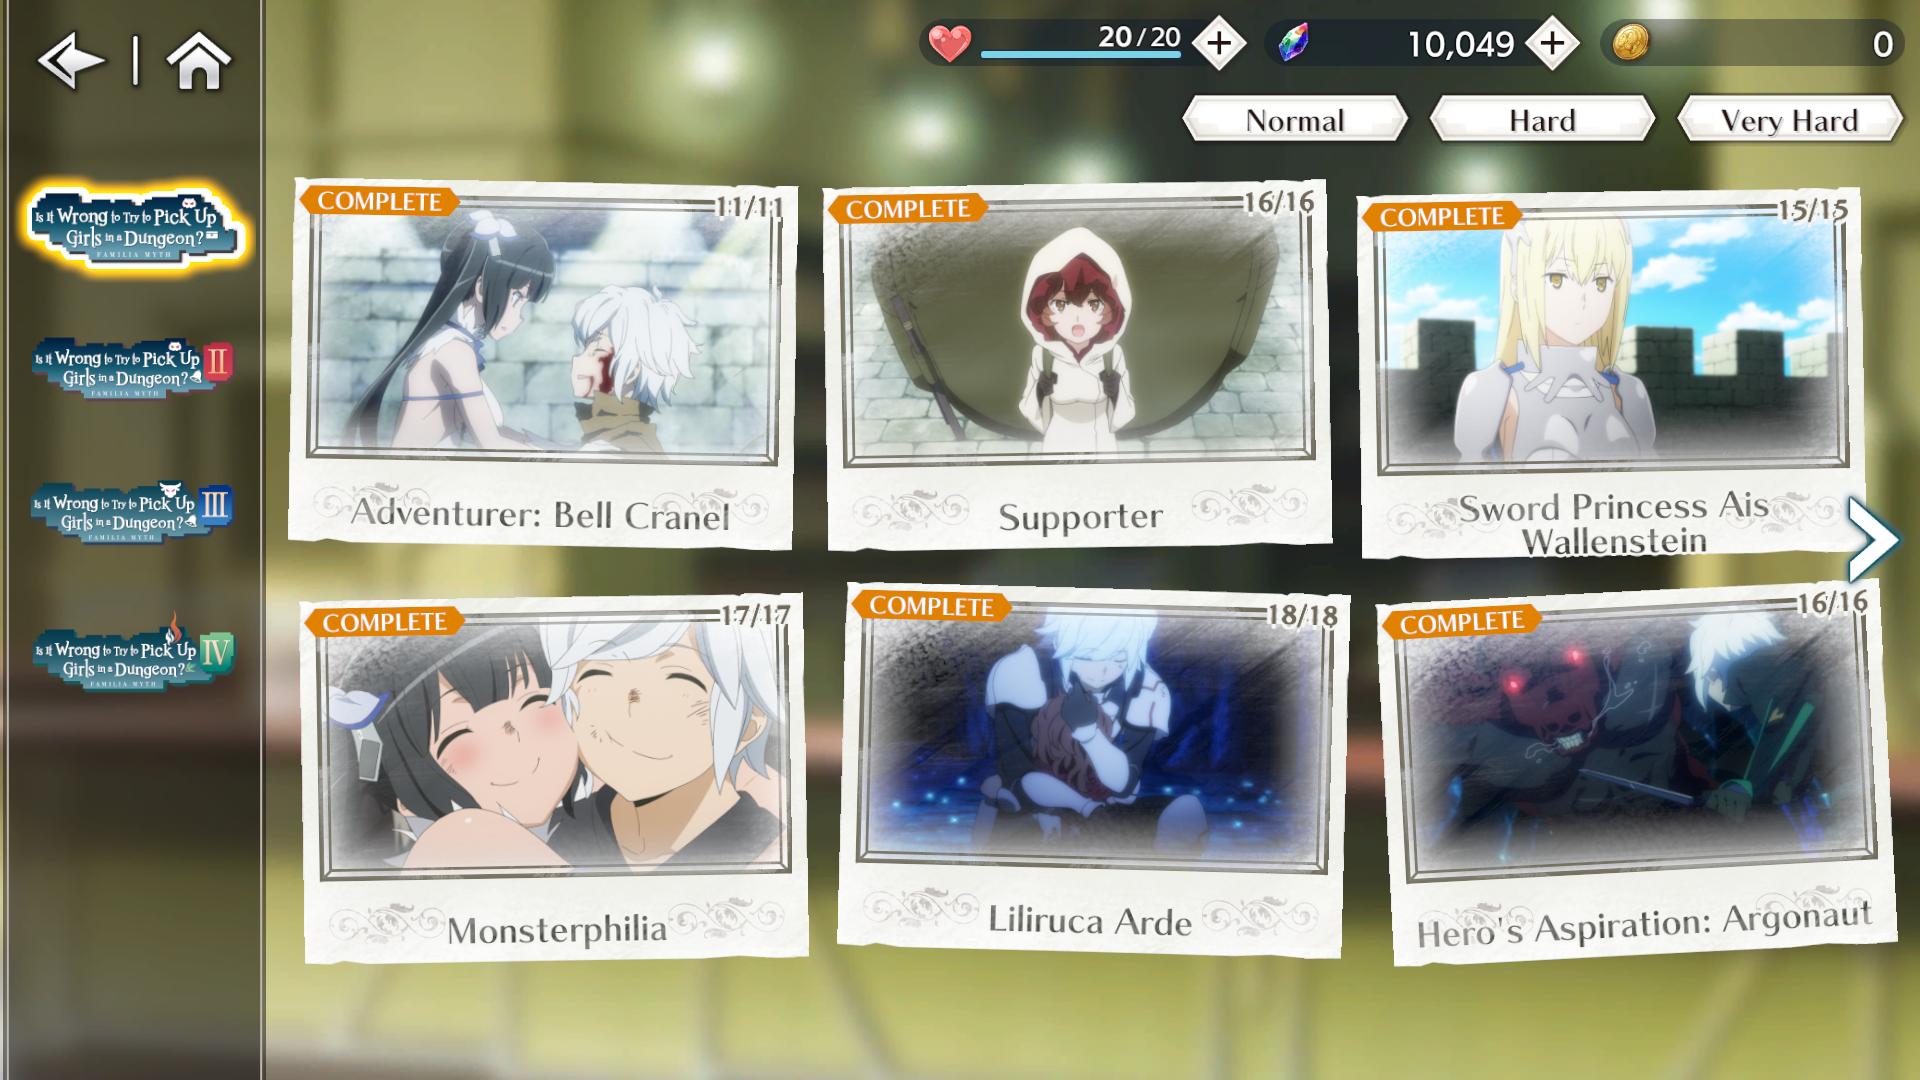 How to Install and Play DanMachi BATTLE CHRONICLE on PC with